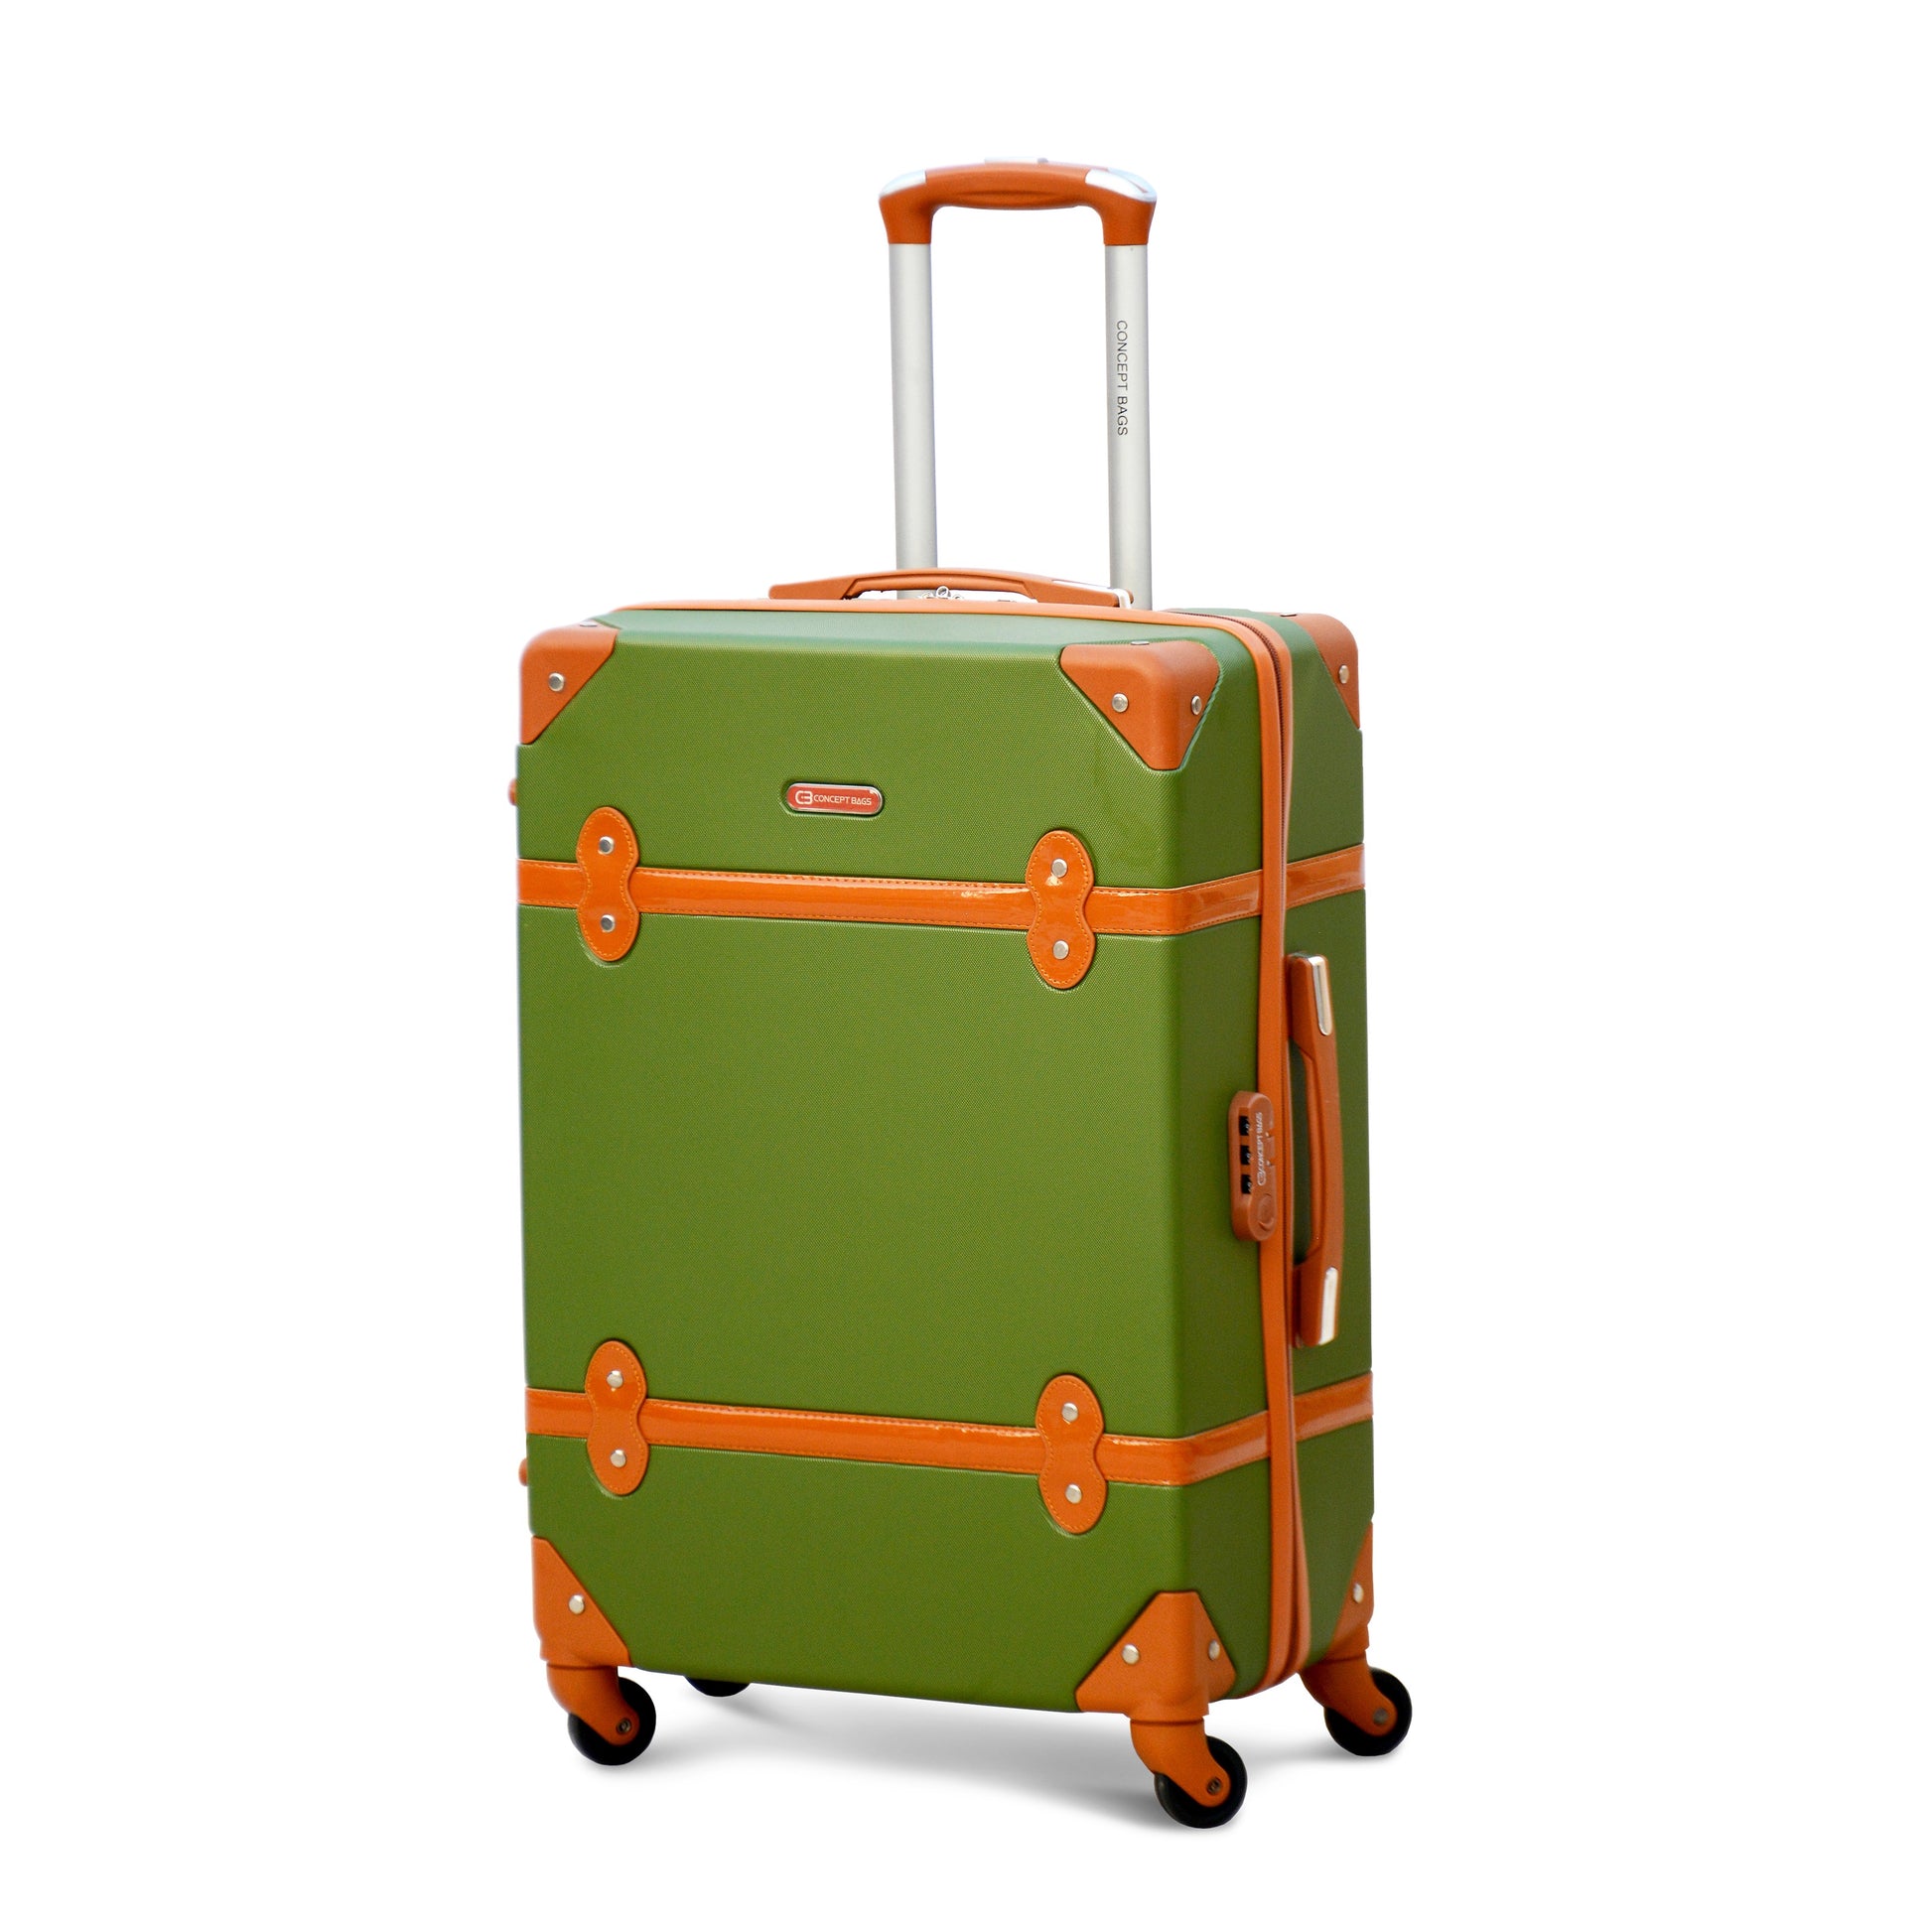 light weight spinner wheel light weight green luggage corner guard luggage with number lock system Zaappy UAE